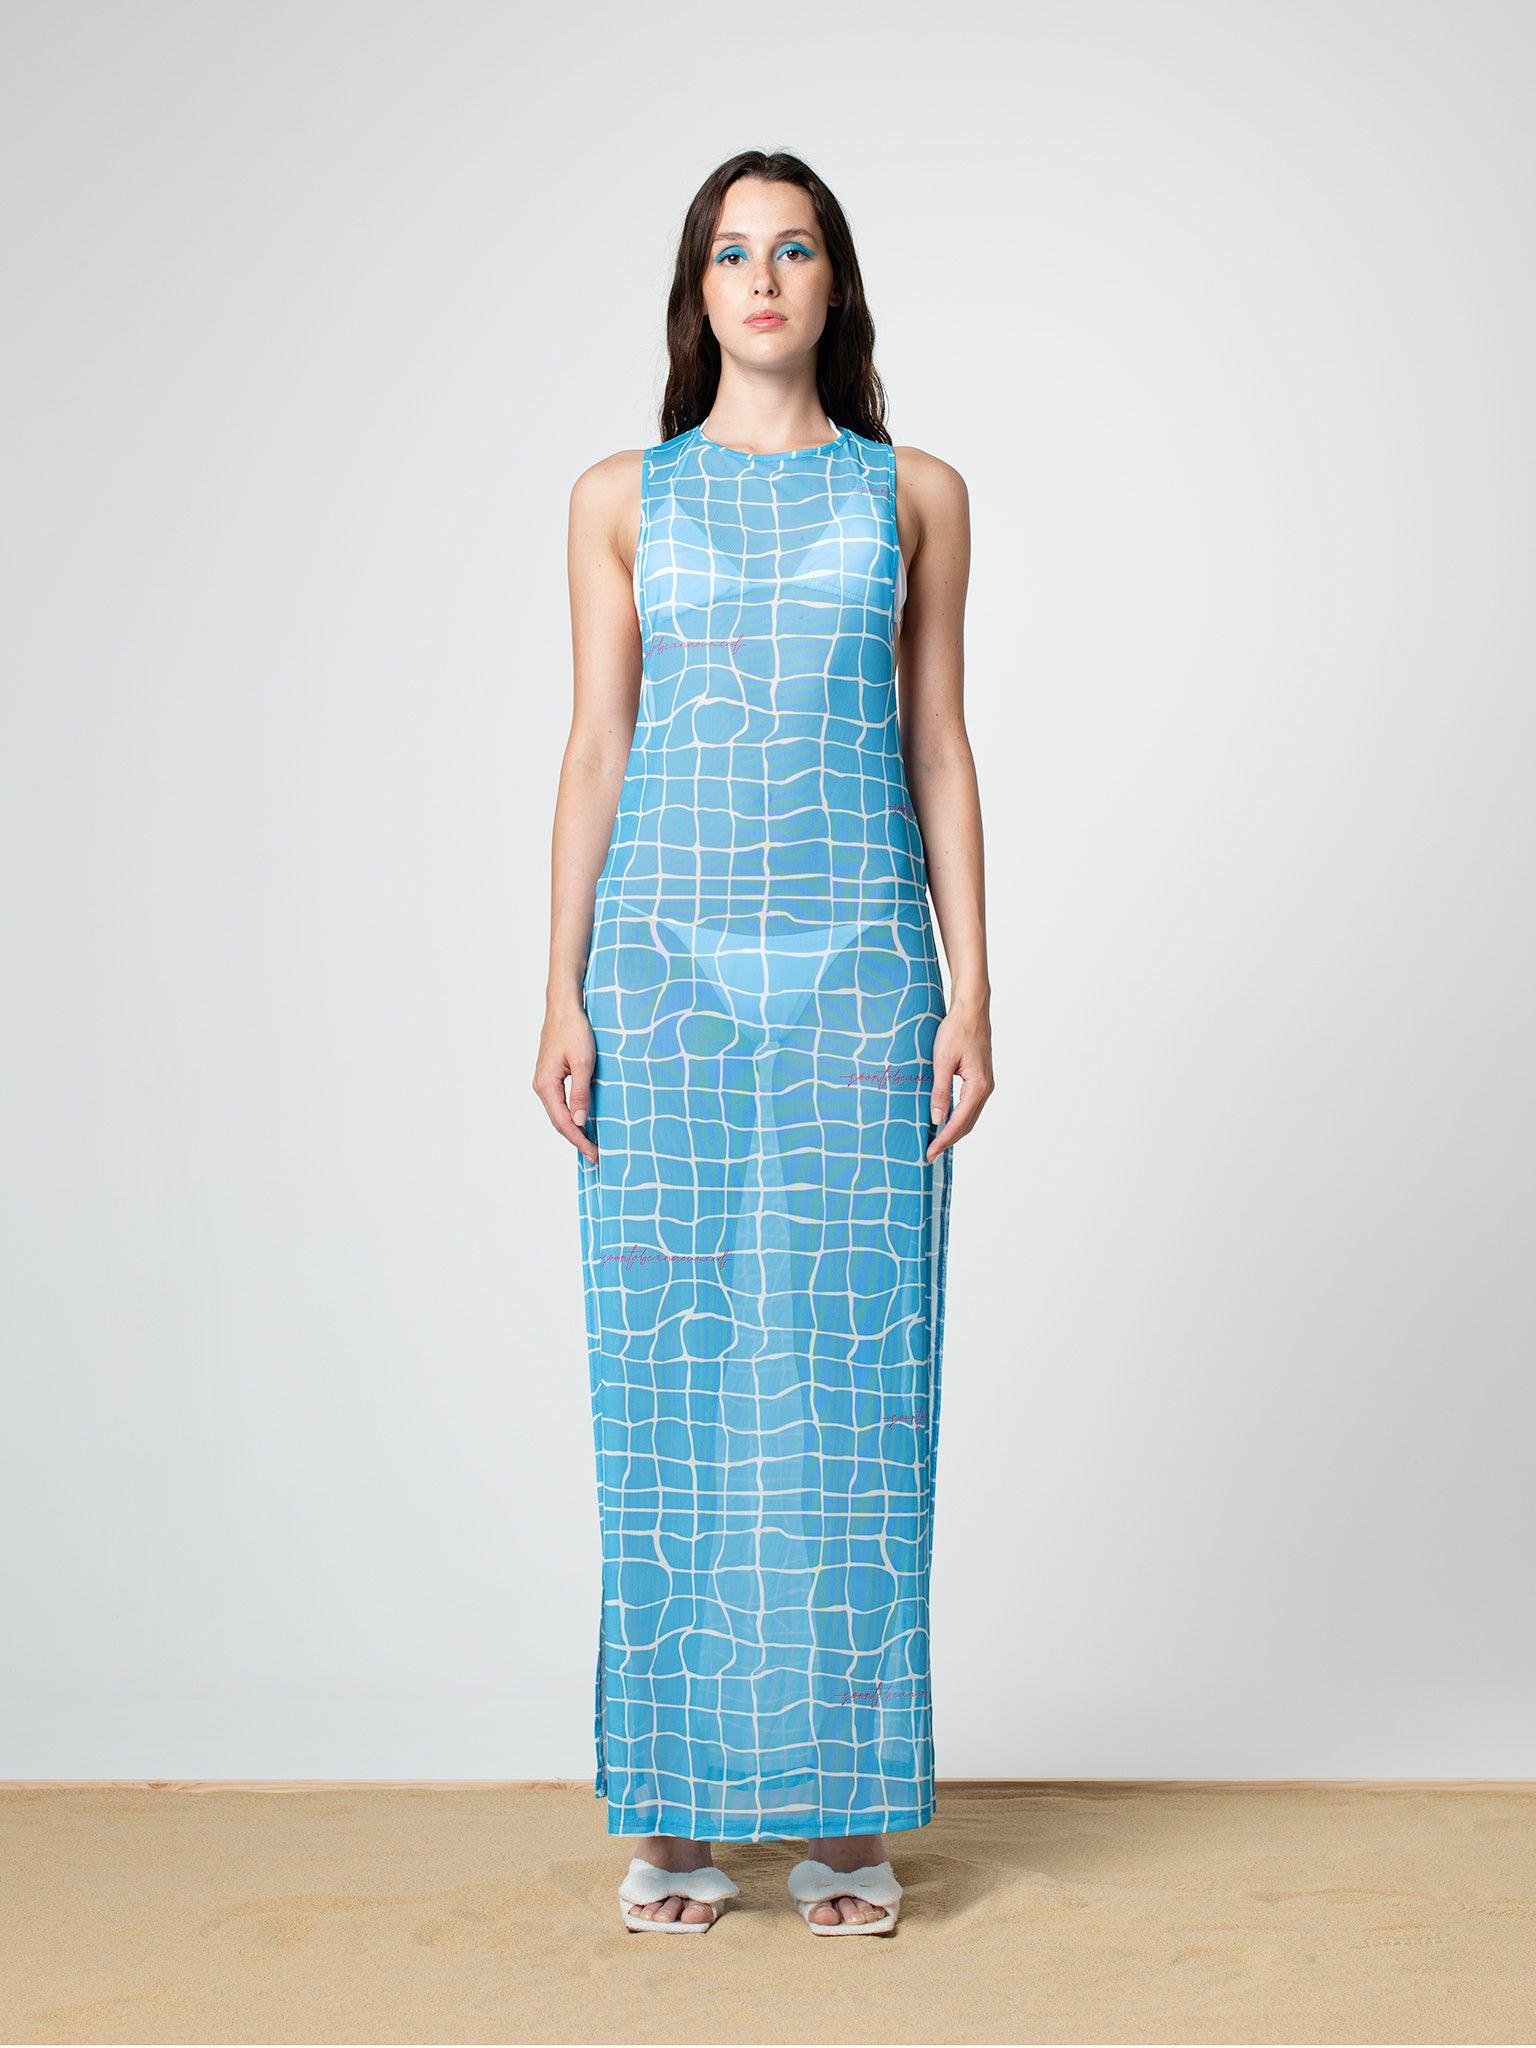 Pool Tile Mesh Dress - SOON TO BE ANNOUNCED